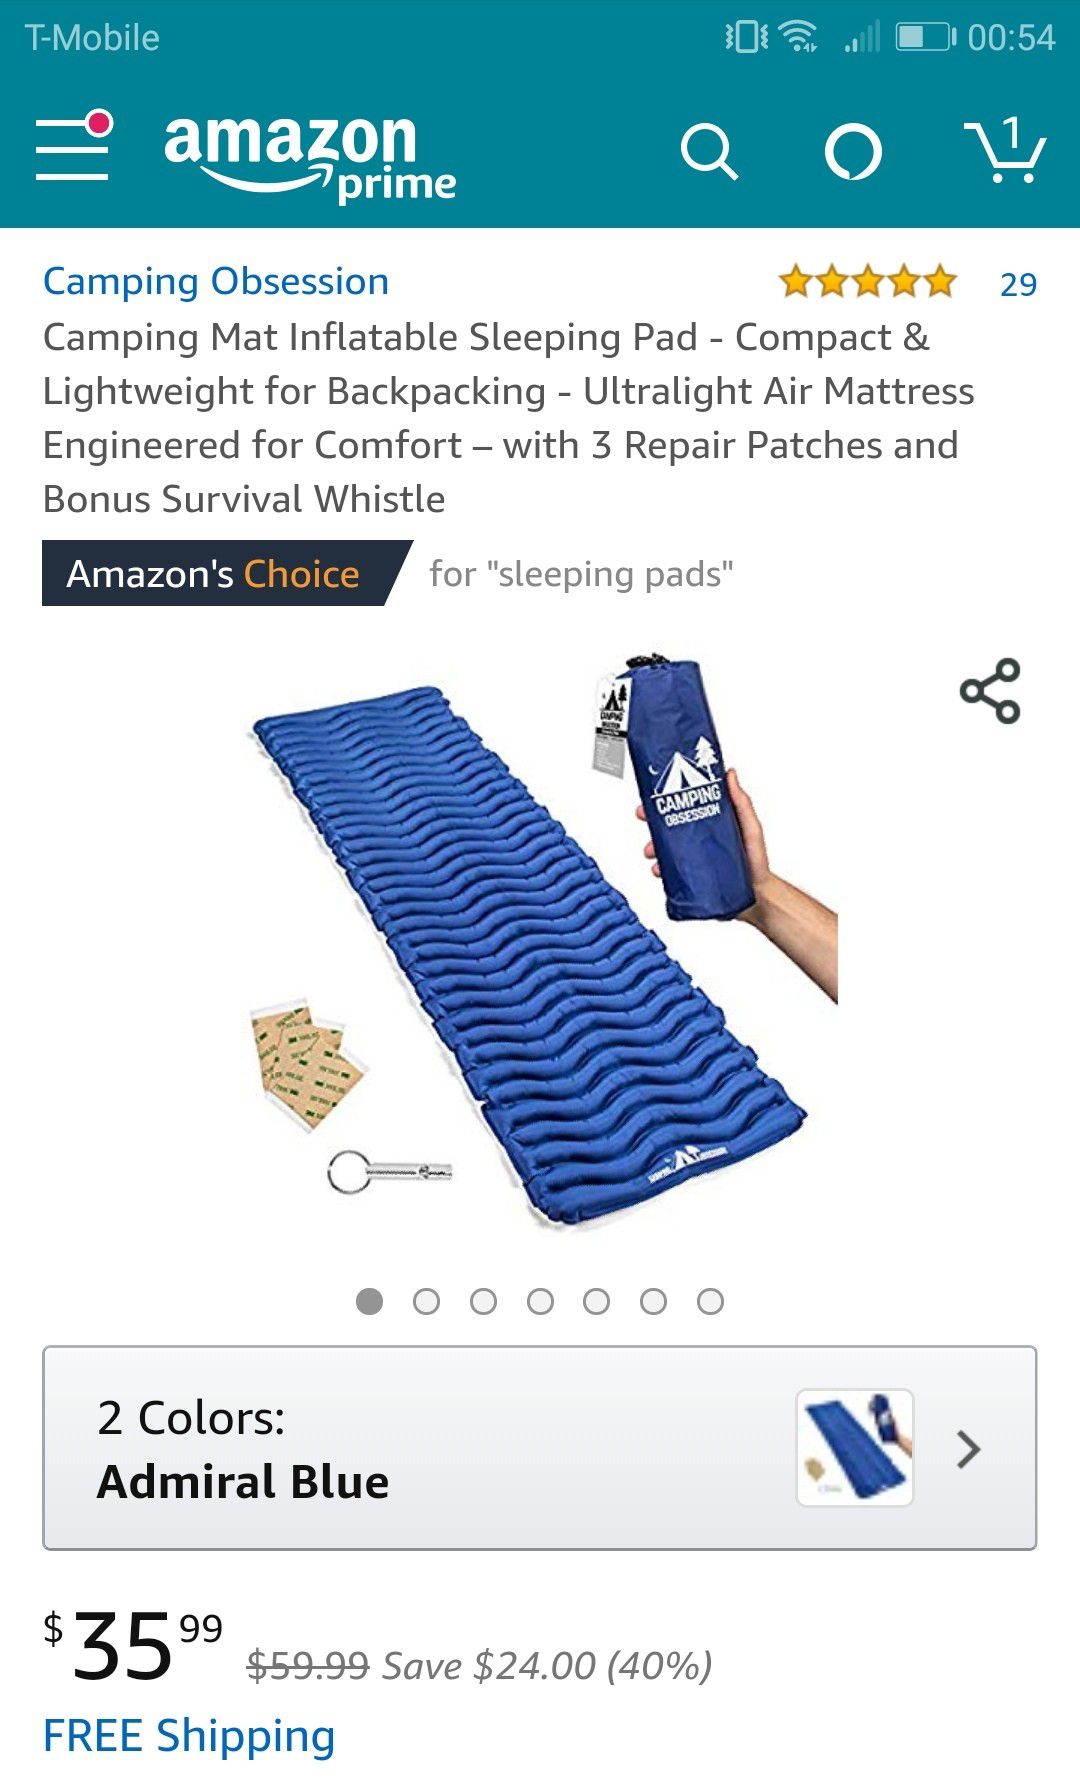 Camping mat inflatable sleeping pad- brand new